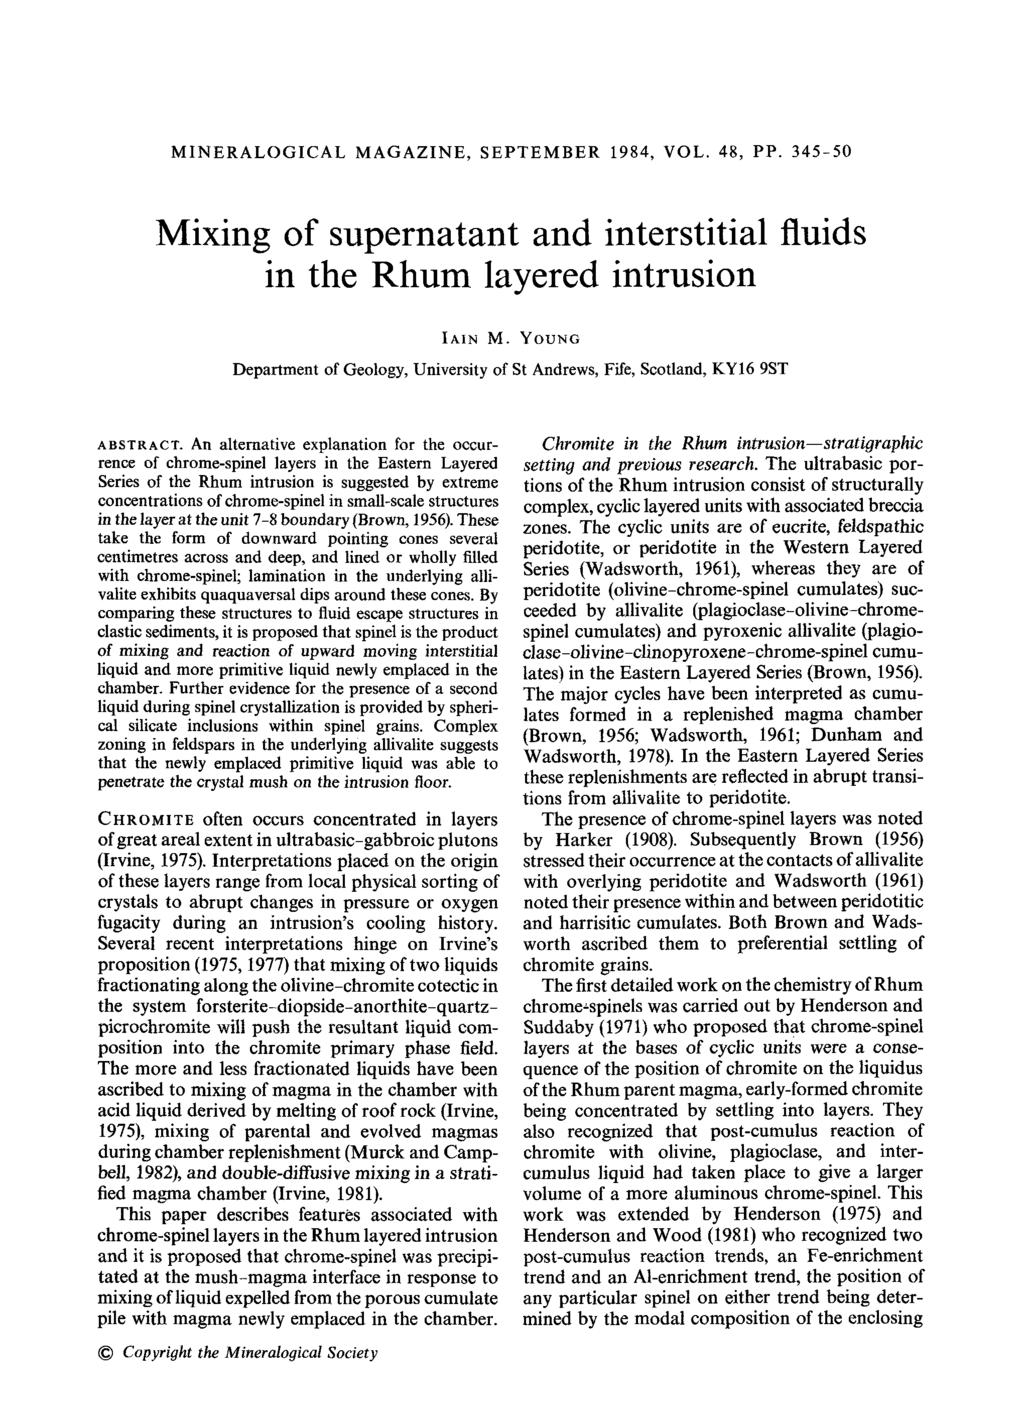 MINERALOGICAL MAGAZINE, SEPTEMBER 1984, VOL. 48, PP. 345-50 Mixing of supernatant and interstitial fluids in the Rhum layered intrusion IAIN M.